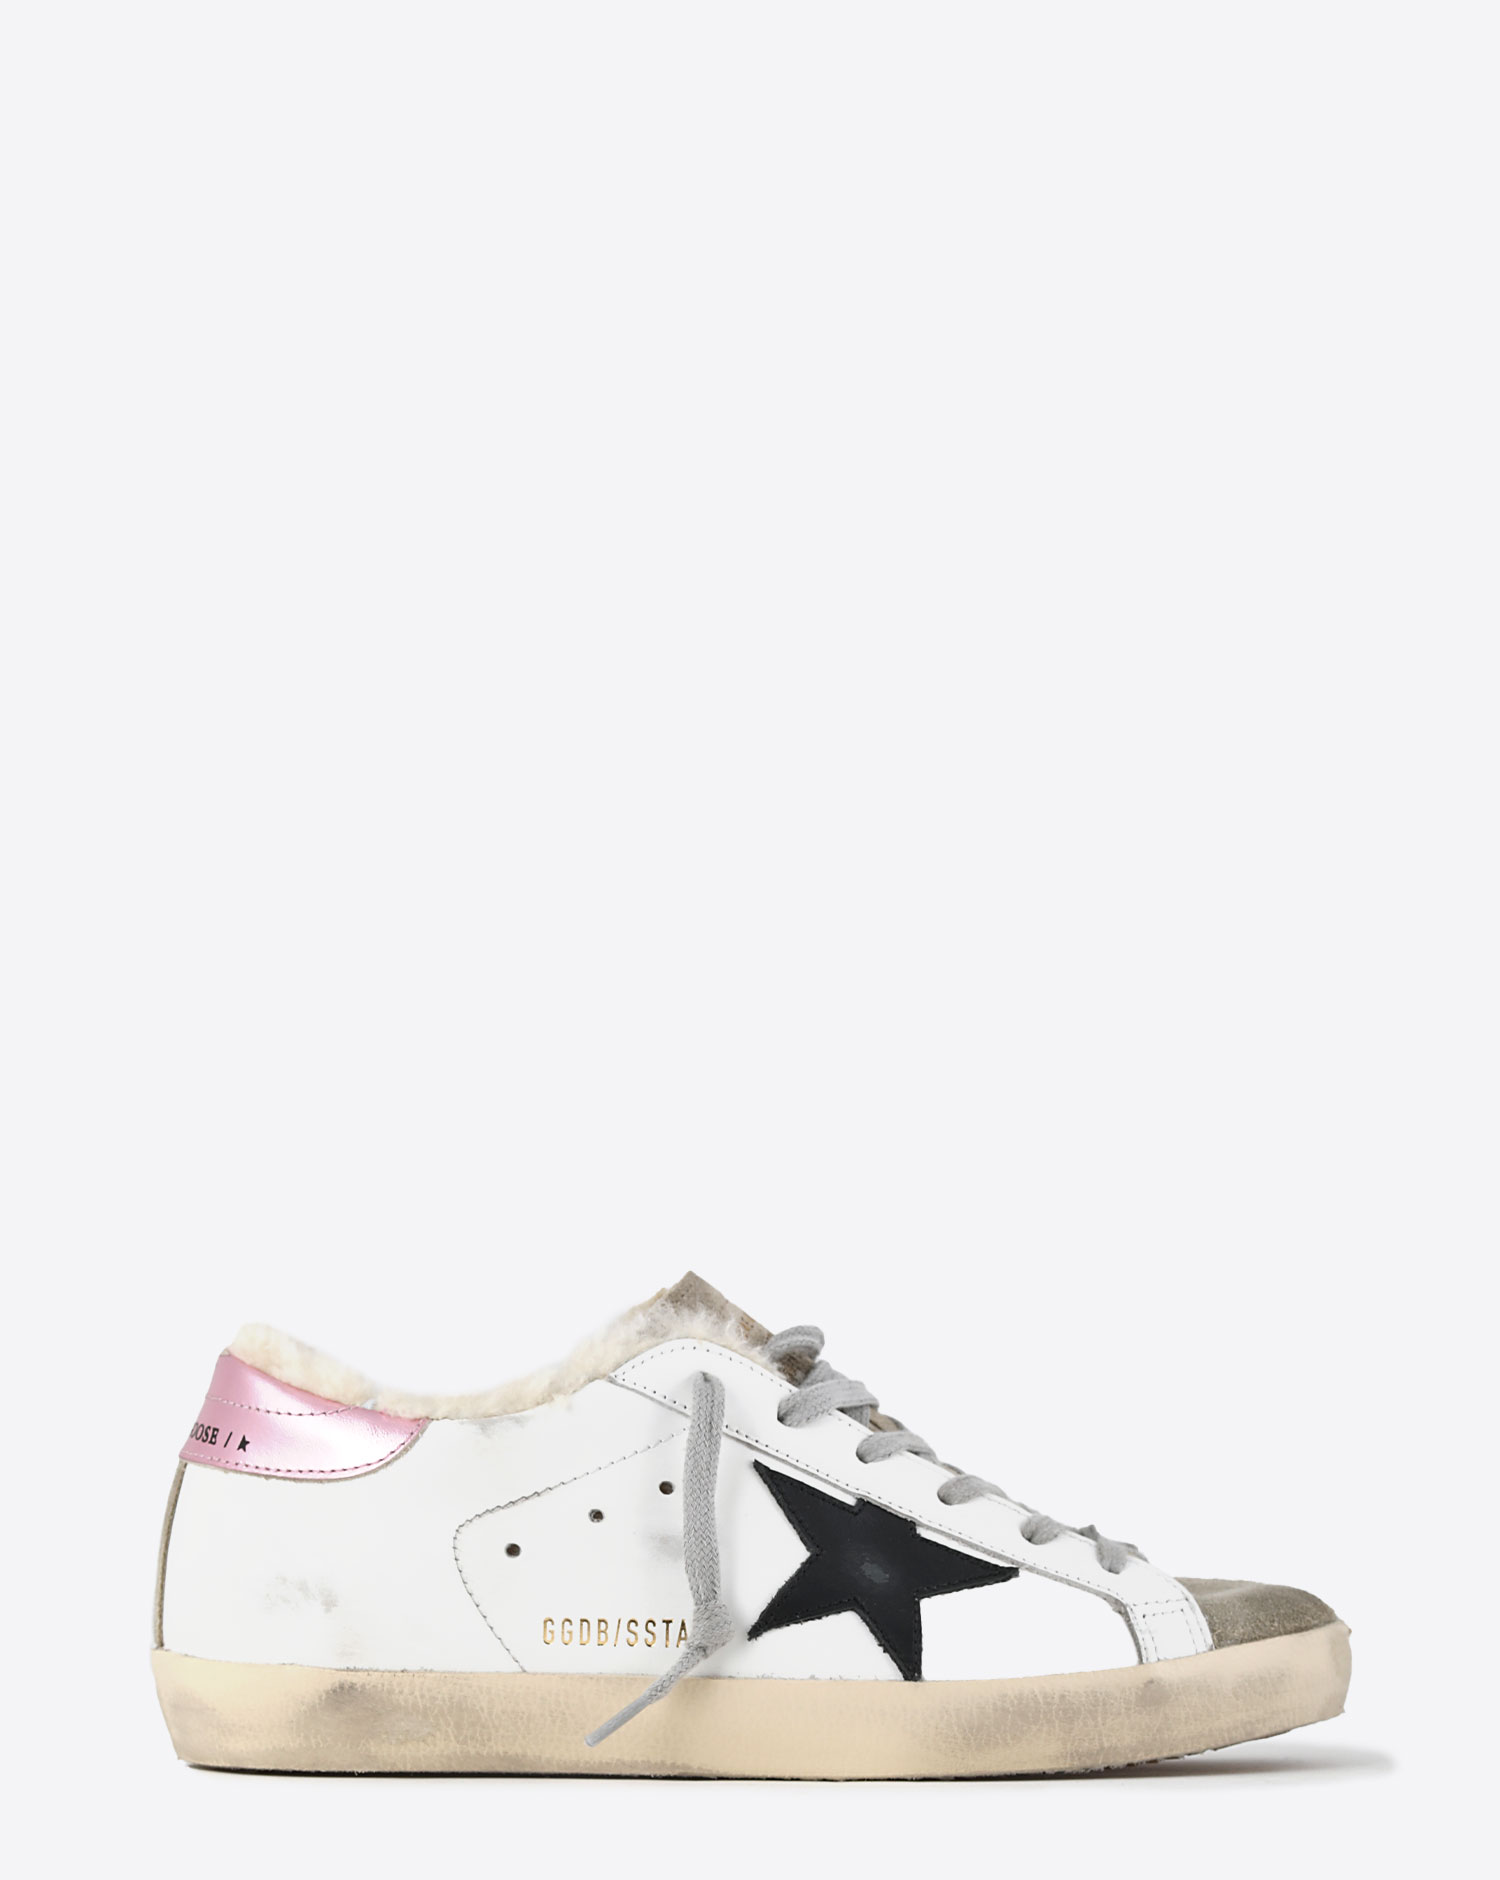 Women's Super-Star in white leather with gray suede star